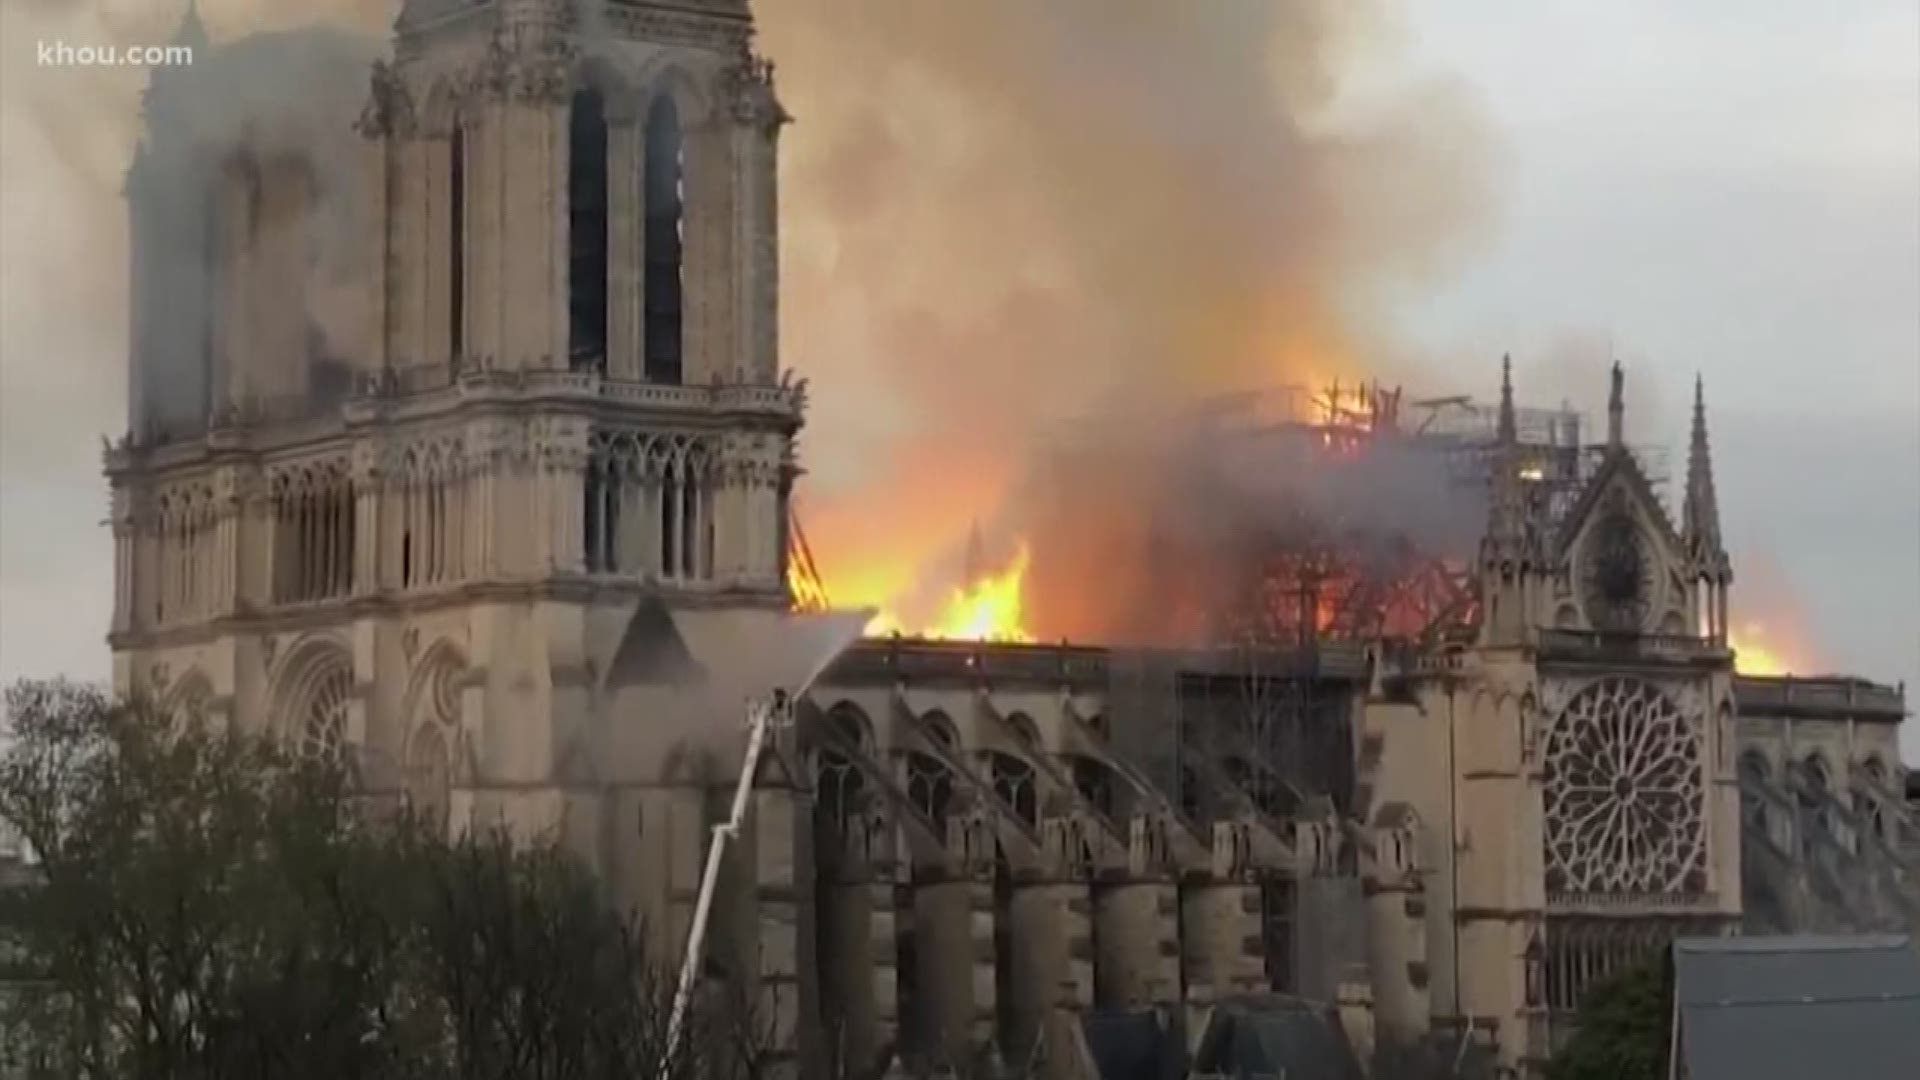 Firefighters are working to save the priceless artwork inside the Notre Dame in Paris as the iconic cathedral continues to burn.